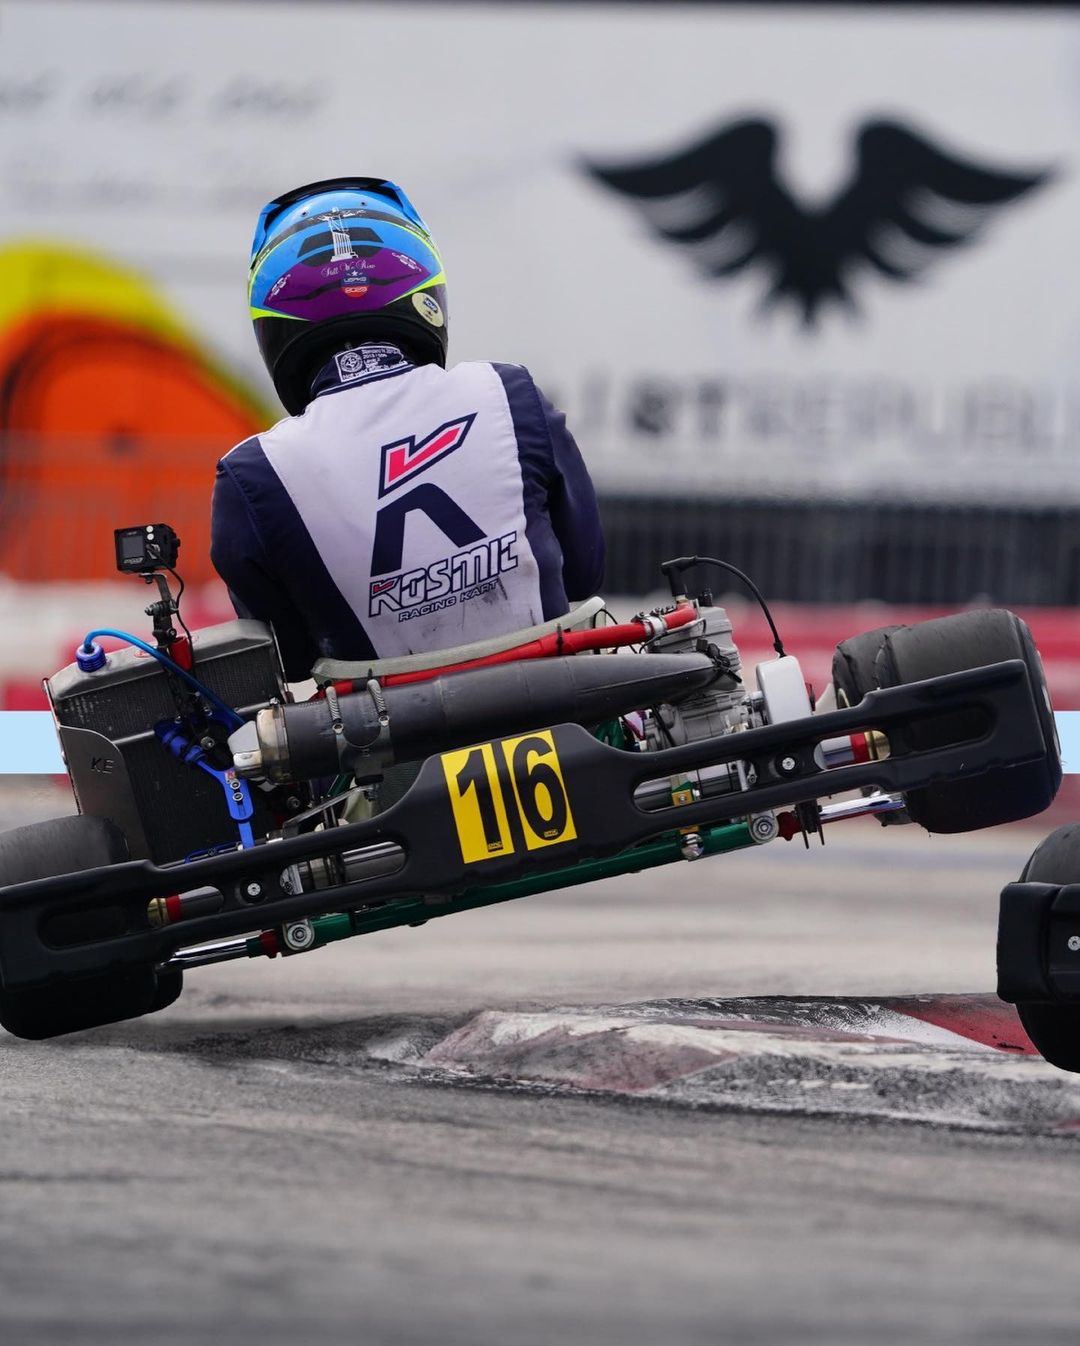 Winter Series Round 3 of IAME Series USA West: A Day of Thrills at AMR Homestead-Miami Motorplex